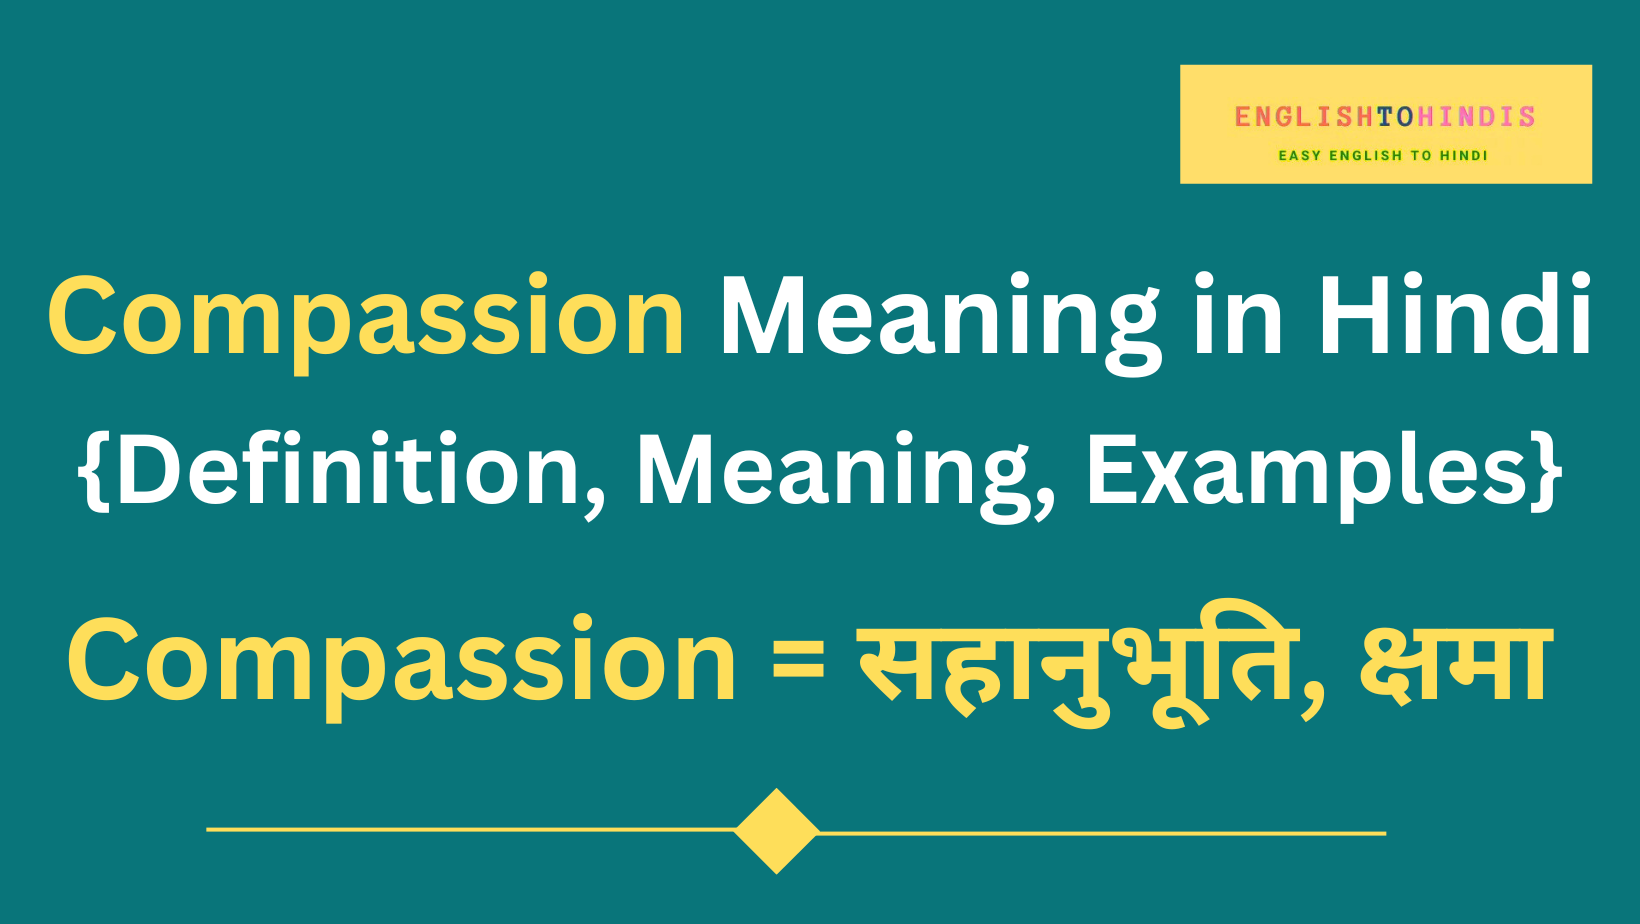 Compassion Meaning in Hindi